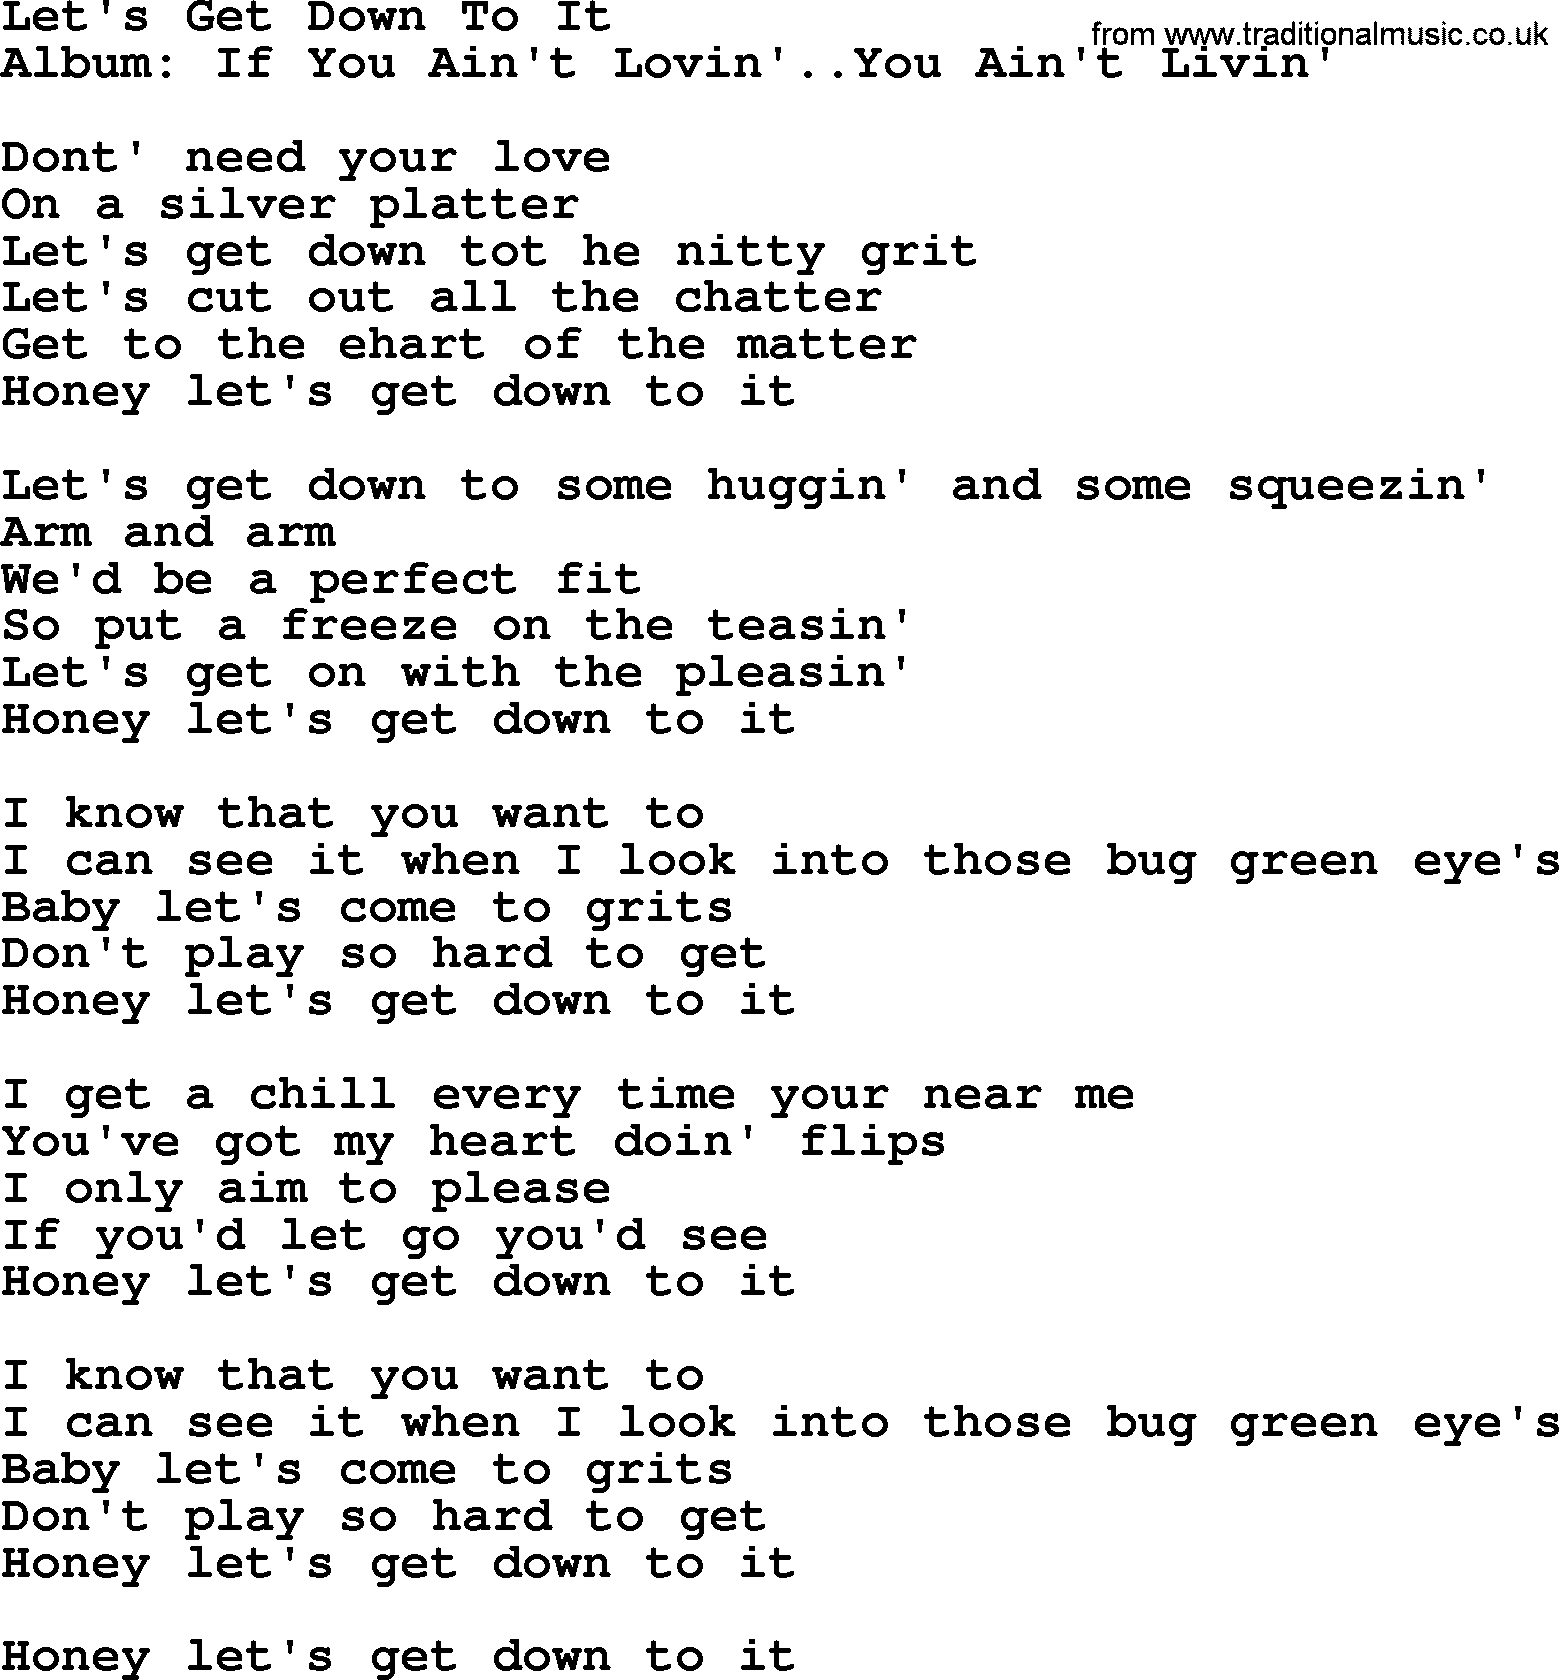 George Strait song: Let's Get Down To It, lyrics